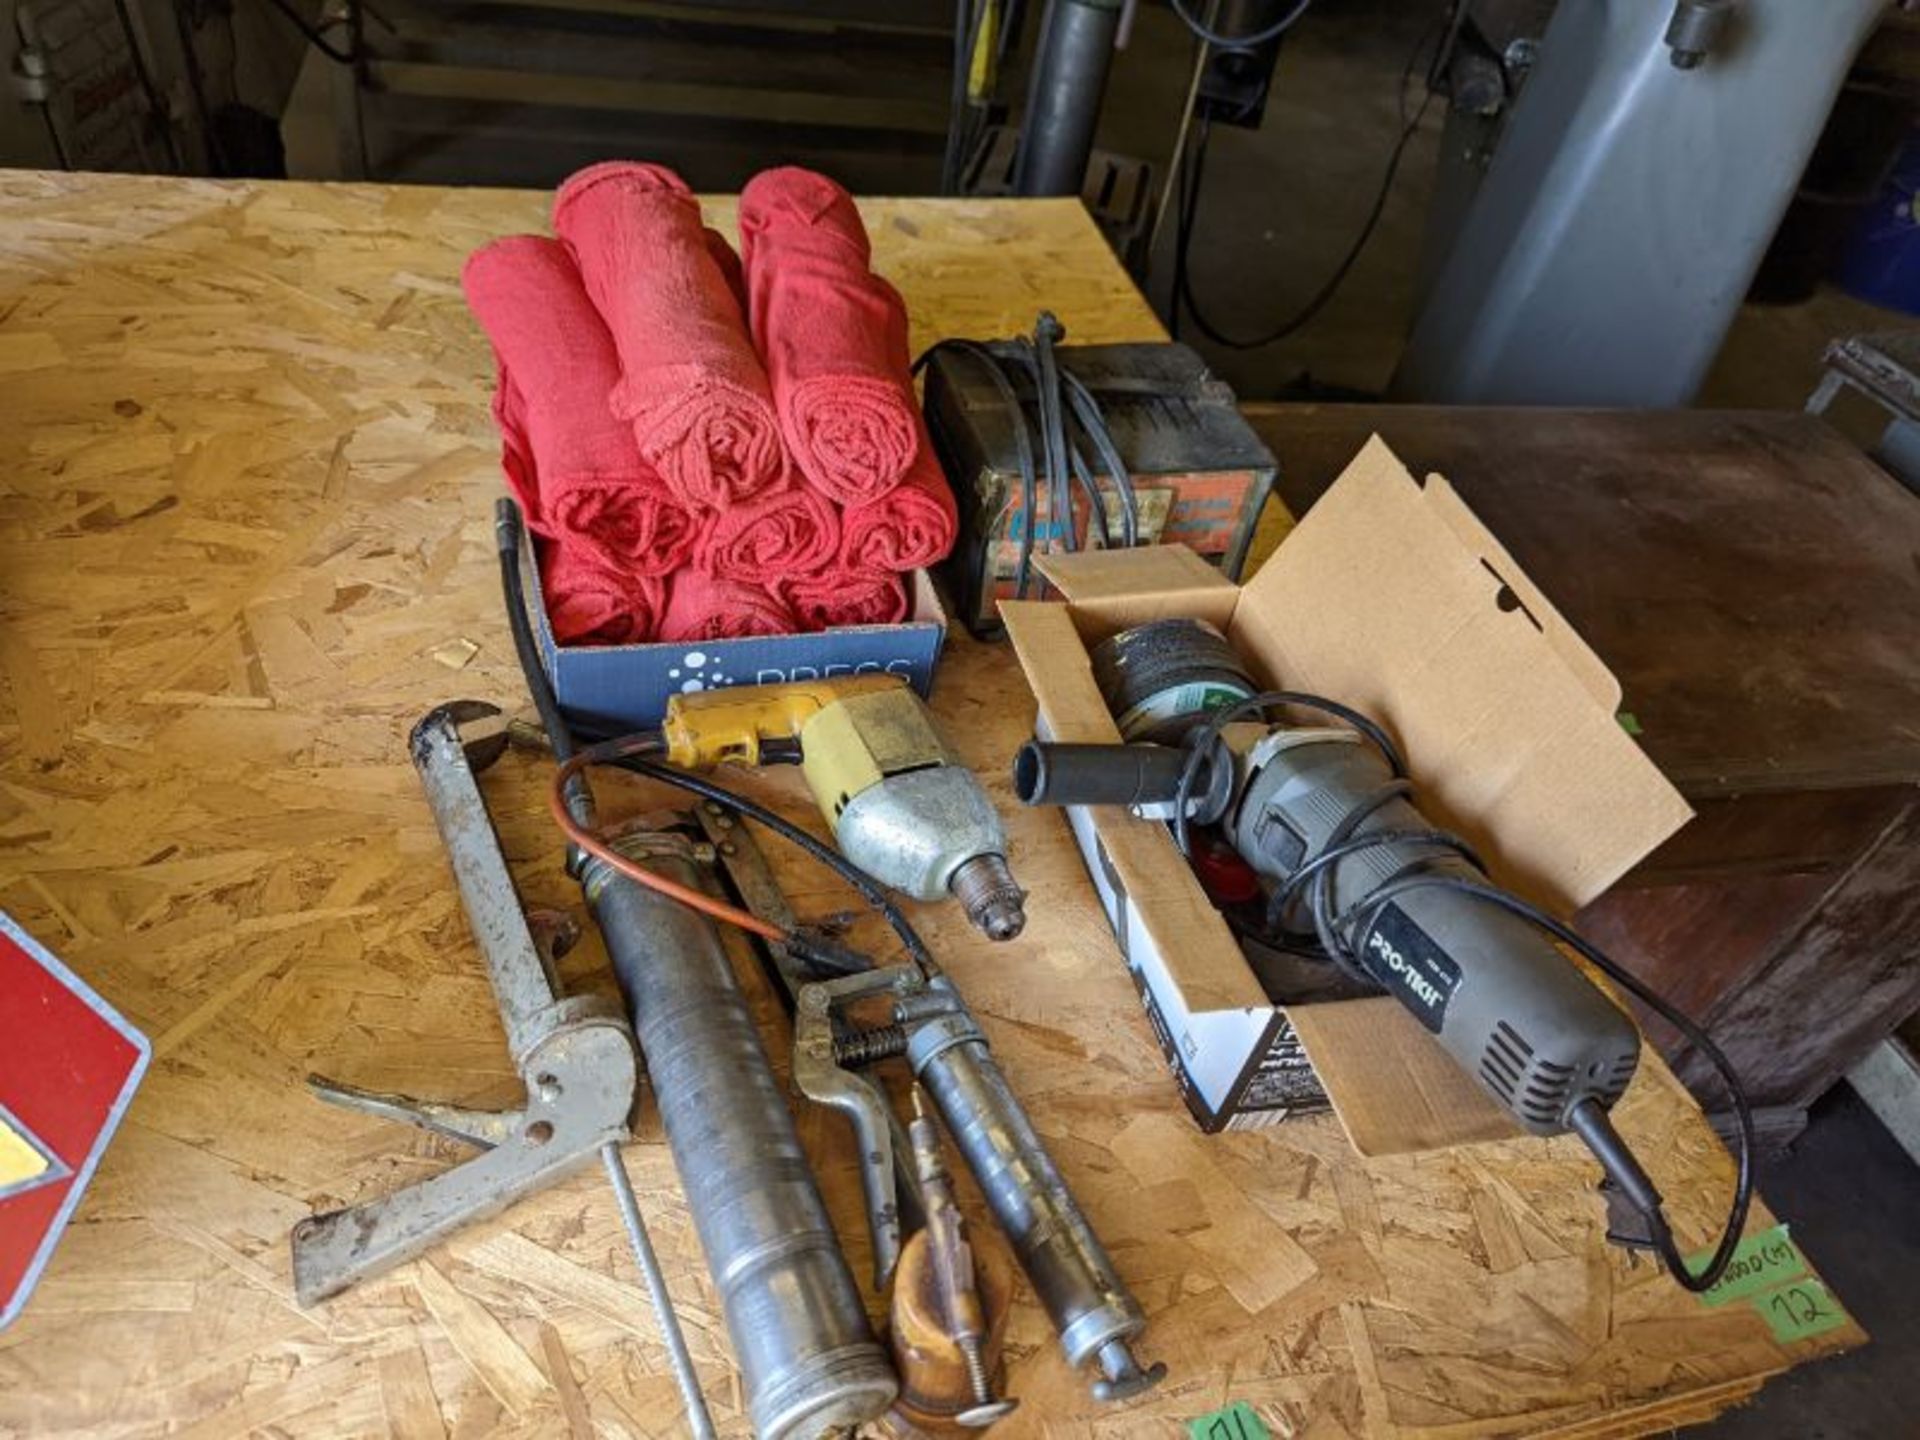 Grease Guns, Misc. Angle Grinder, Drill, Rags, Battery Charger